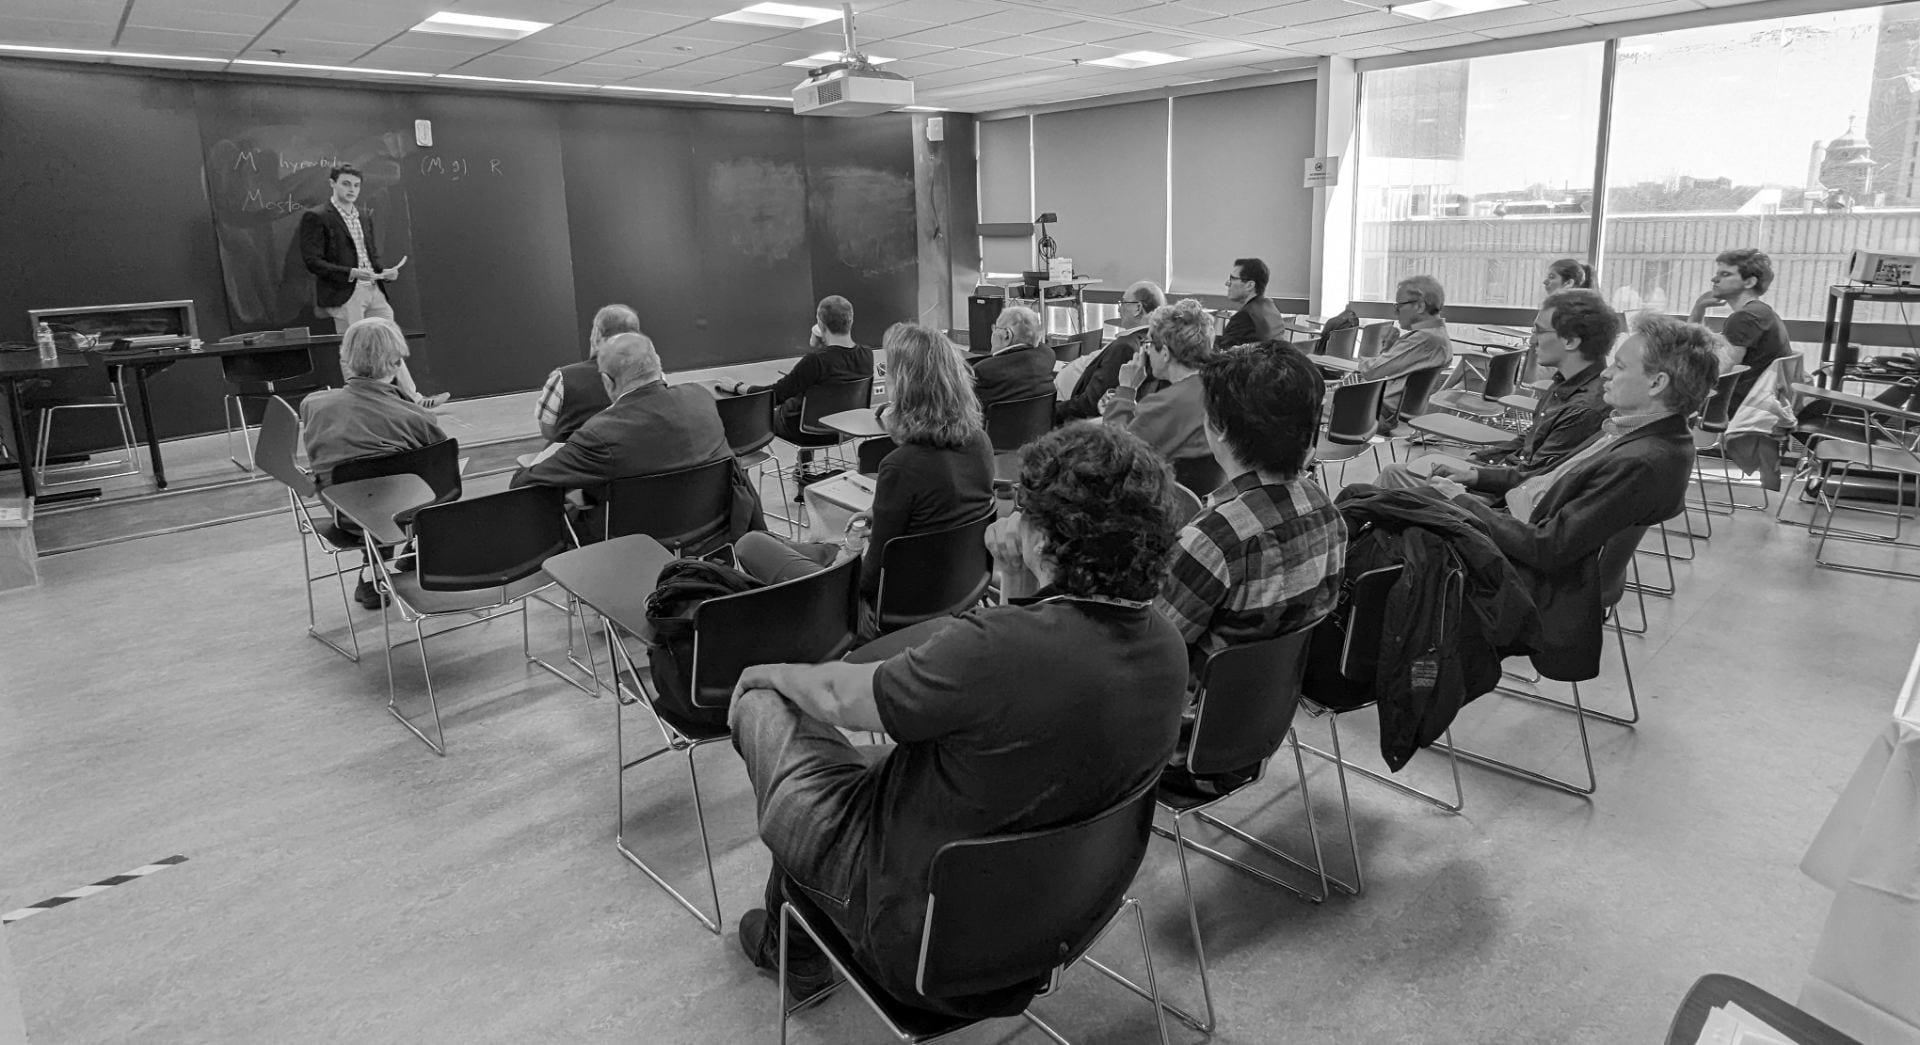 A black and white photo of a student giving a mathematical presentation in a classroom in front of faculty members.